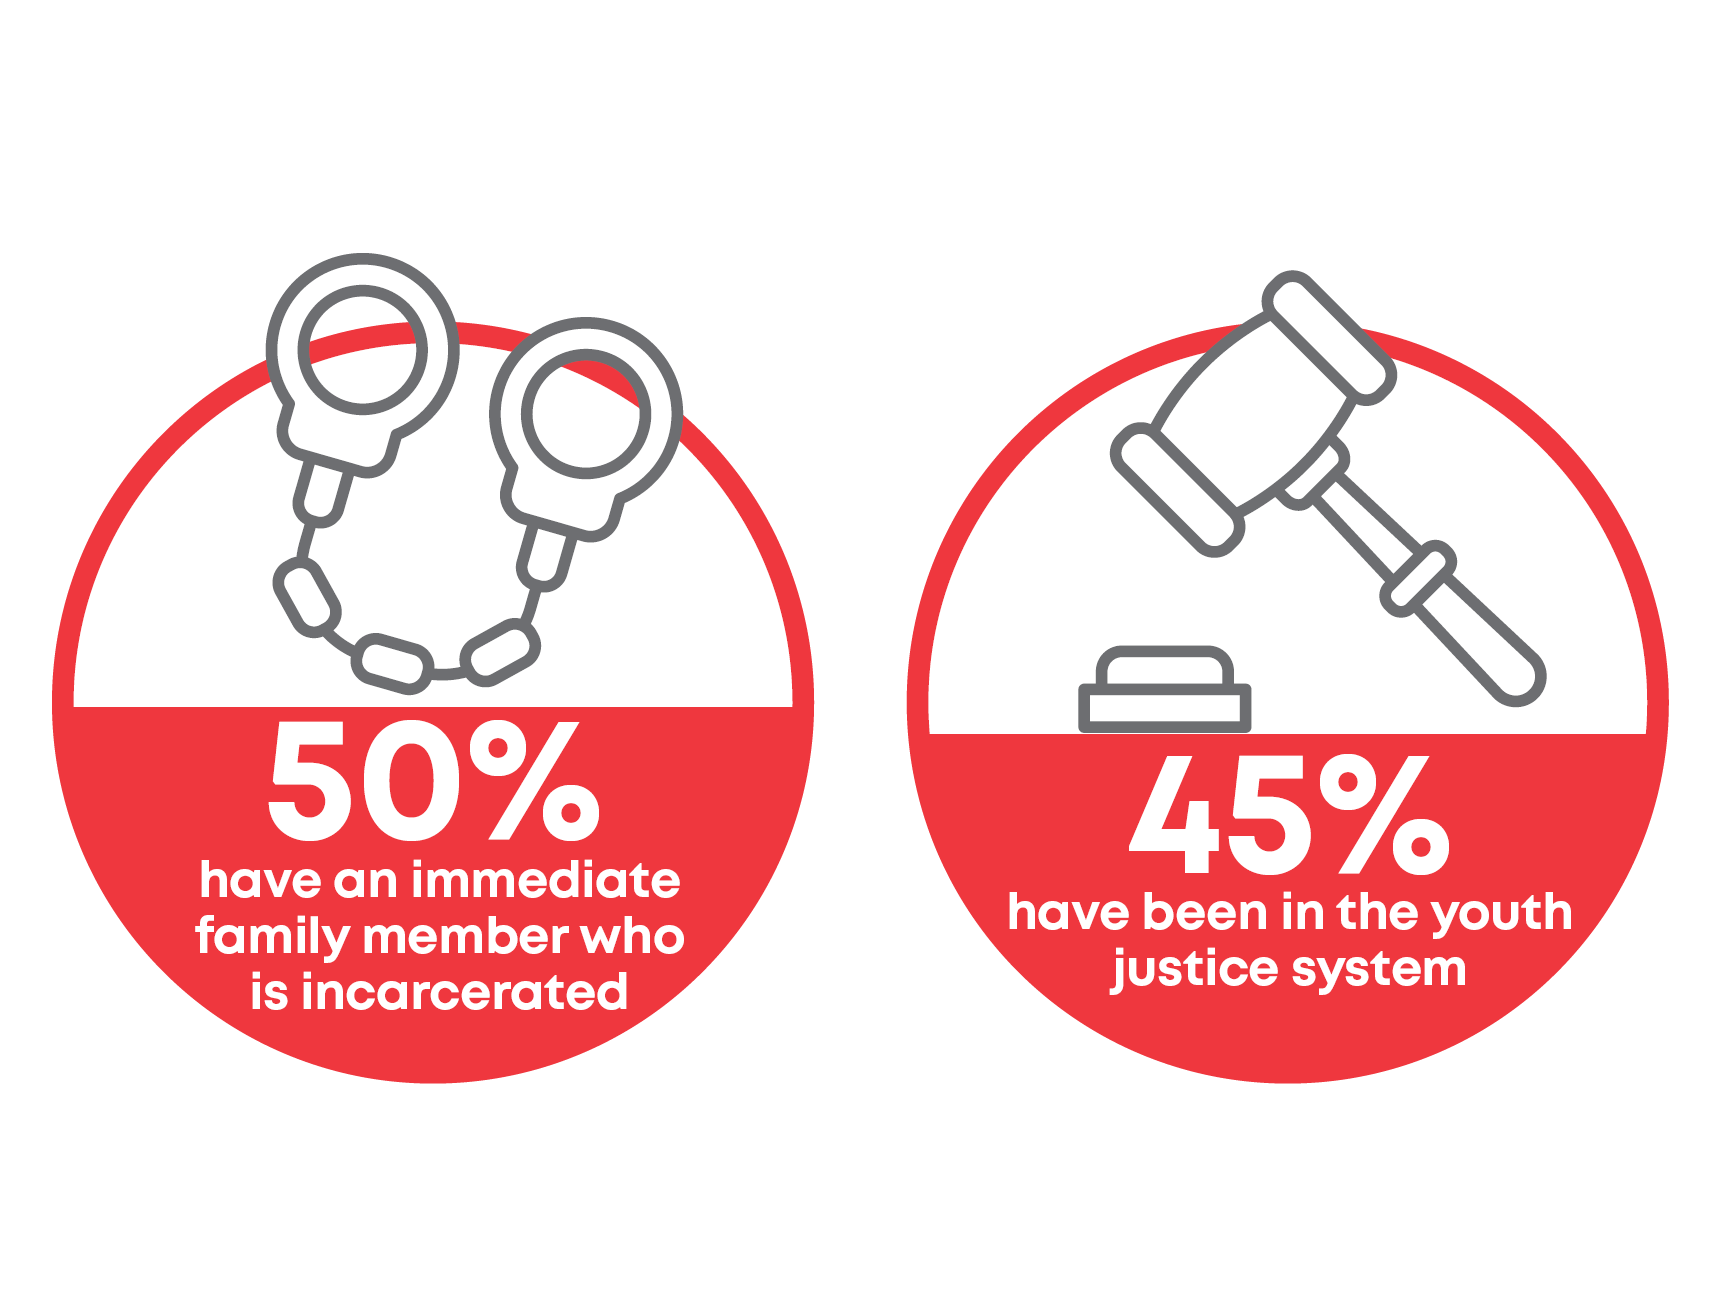 50% of ReBuild participants have an incarcerated family member and 45% have been in the youth justice system.